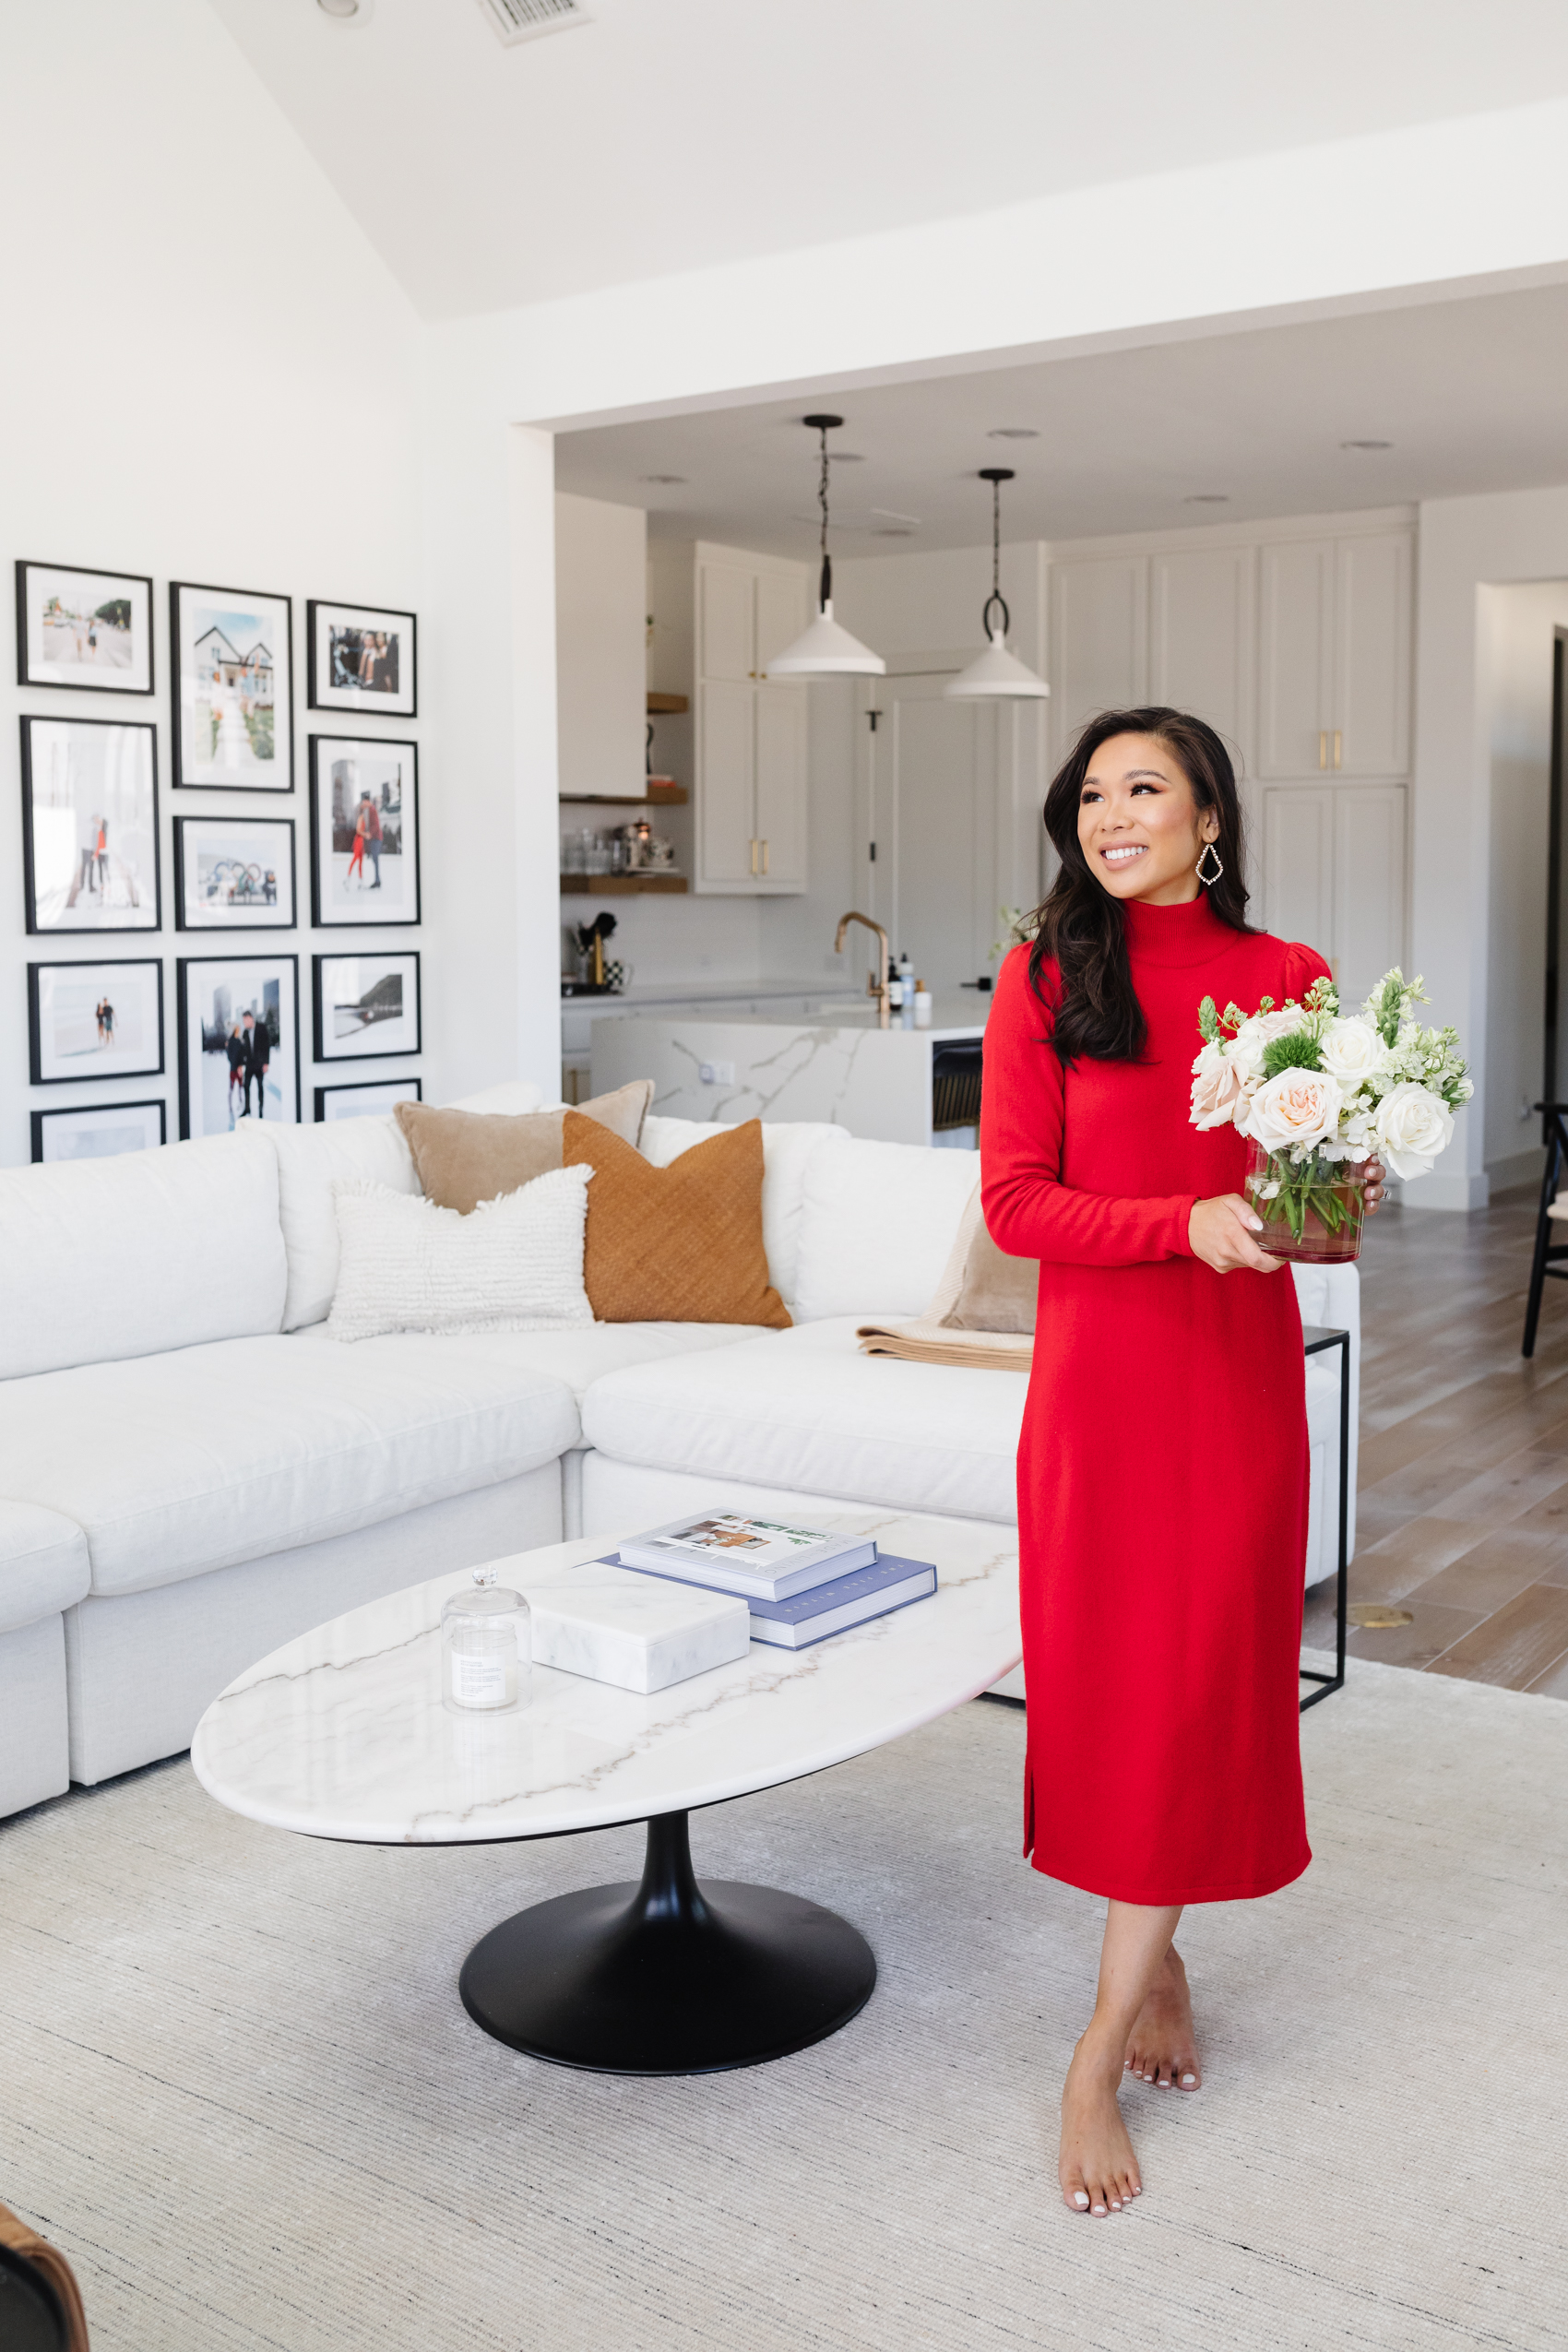 Blogger Hoang-Kim Cung's living room in her transitional style home with a Framebridge gallery wall, Arhaus white sofa, and Arhaus marble coffee table